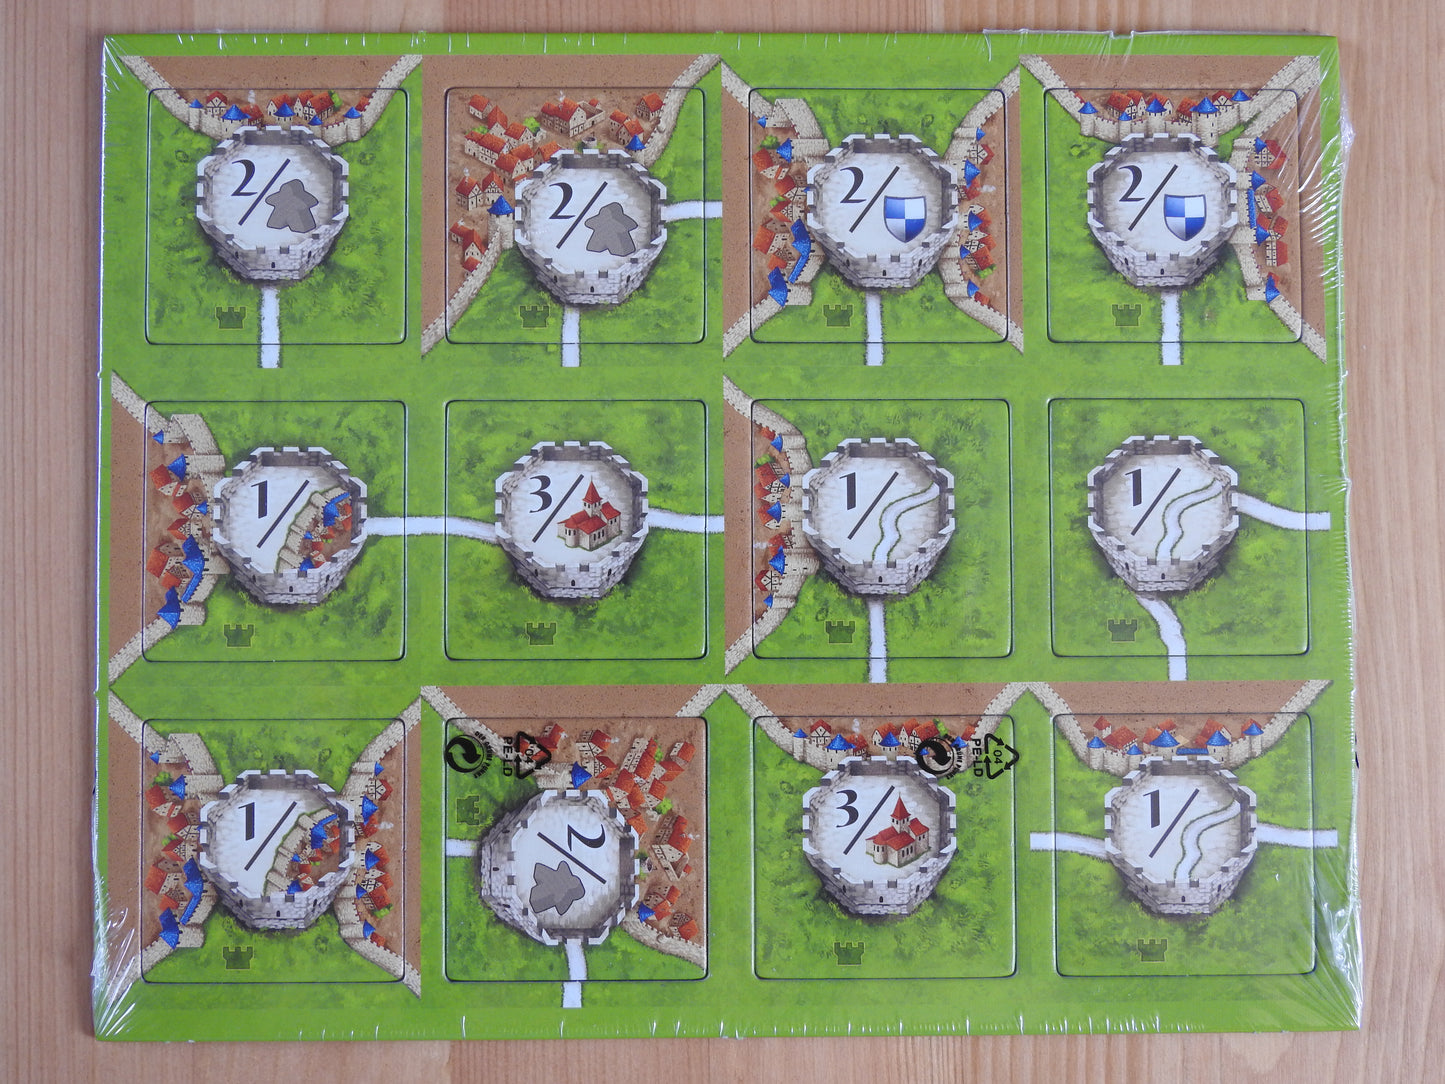 Top view of the 12 watchtower tiles included in this Watchtowers Carcassonne Mini Expansion.